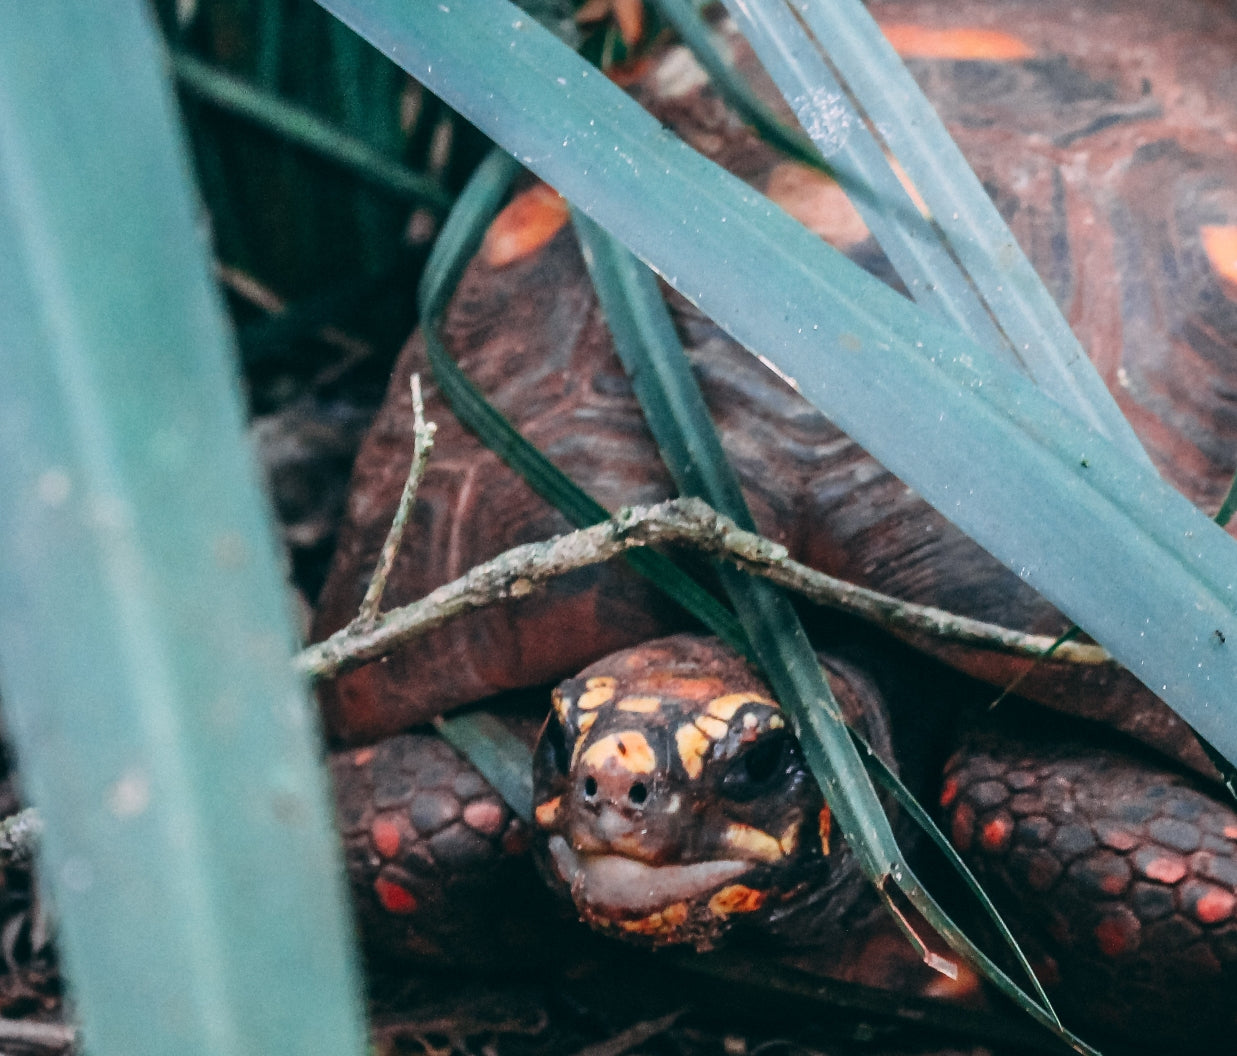 Image of a Red Foot Tortoise hiding under some foliage